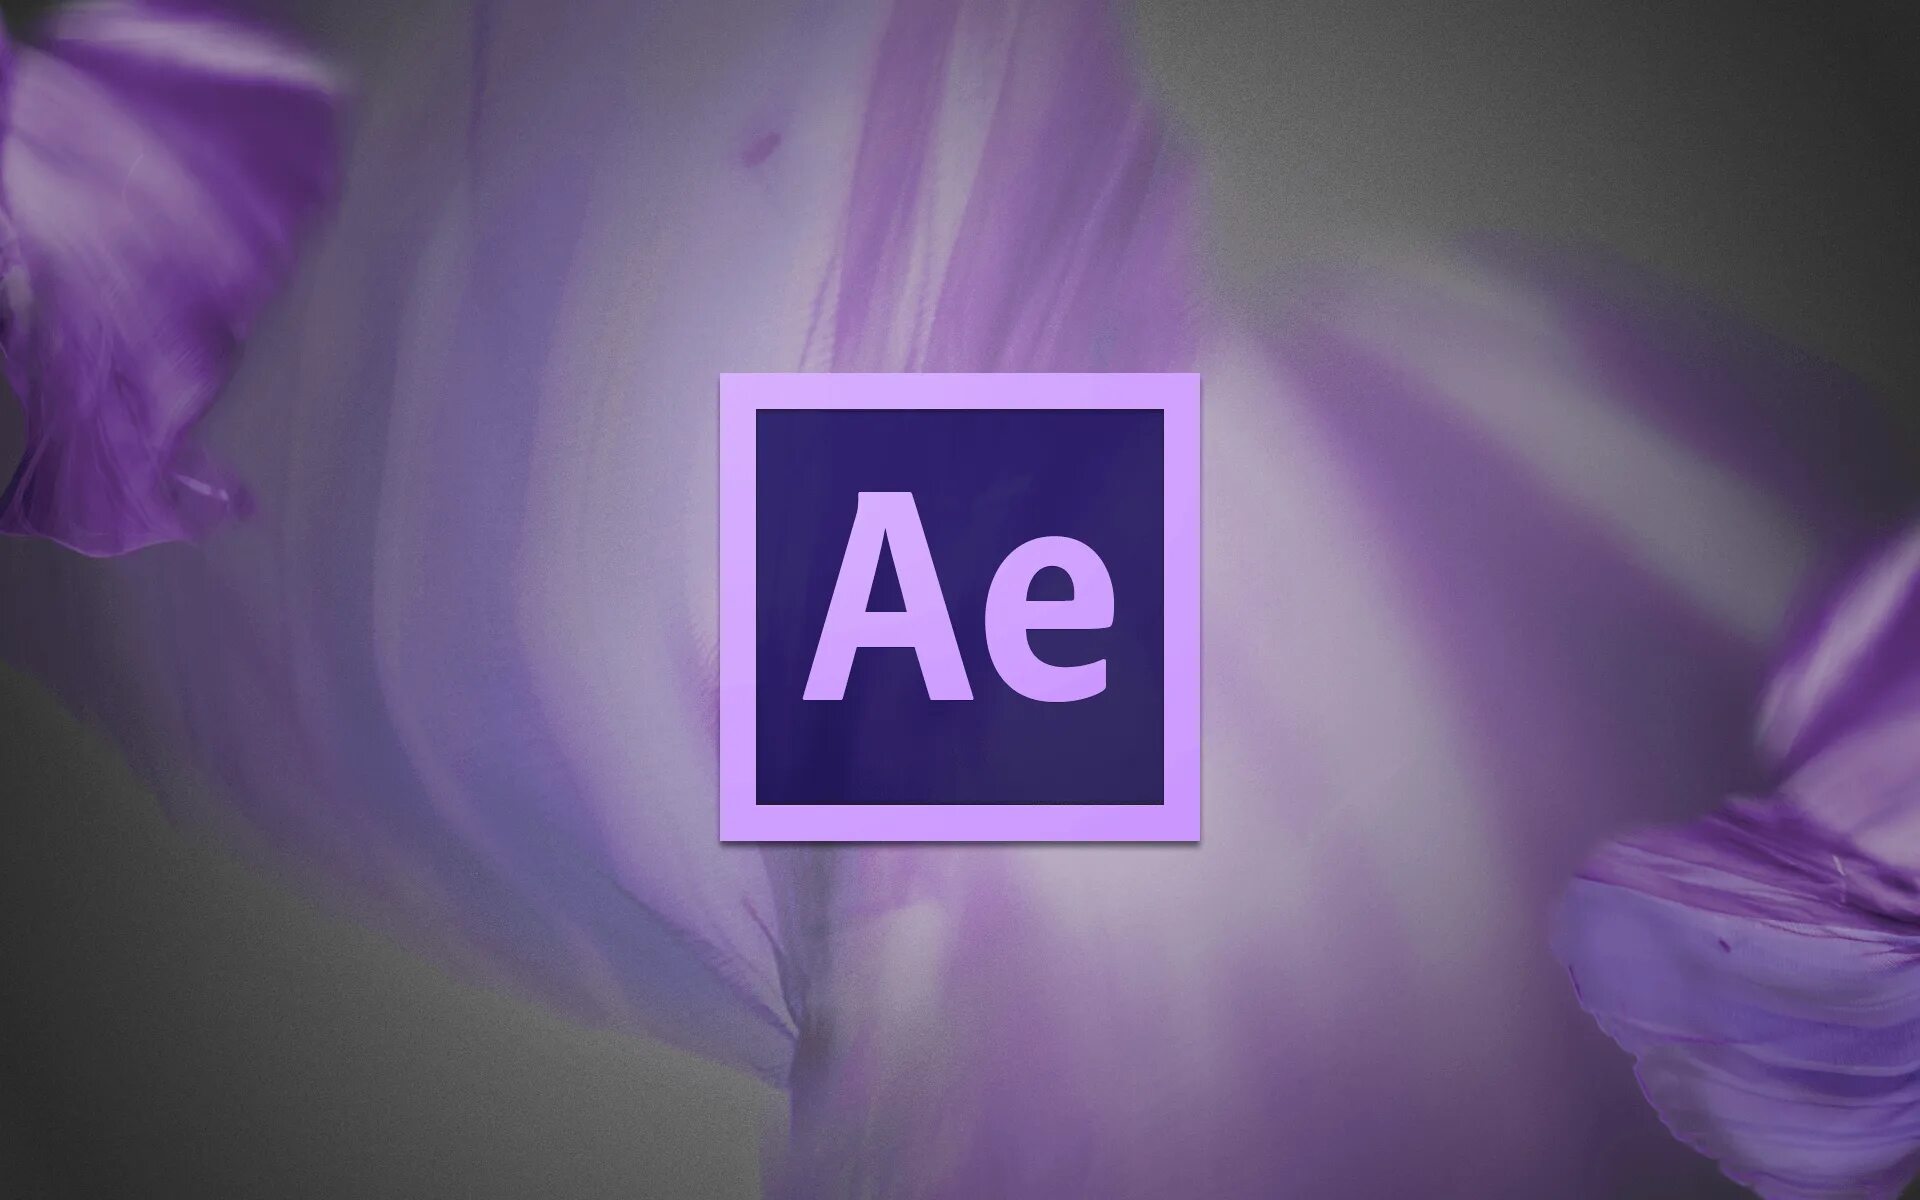 After Effects. Adobe after Effects. Адоб Автор эффект. AE Adobe after Effects. Adobe effect pro